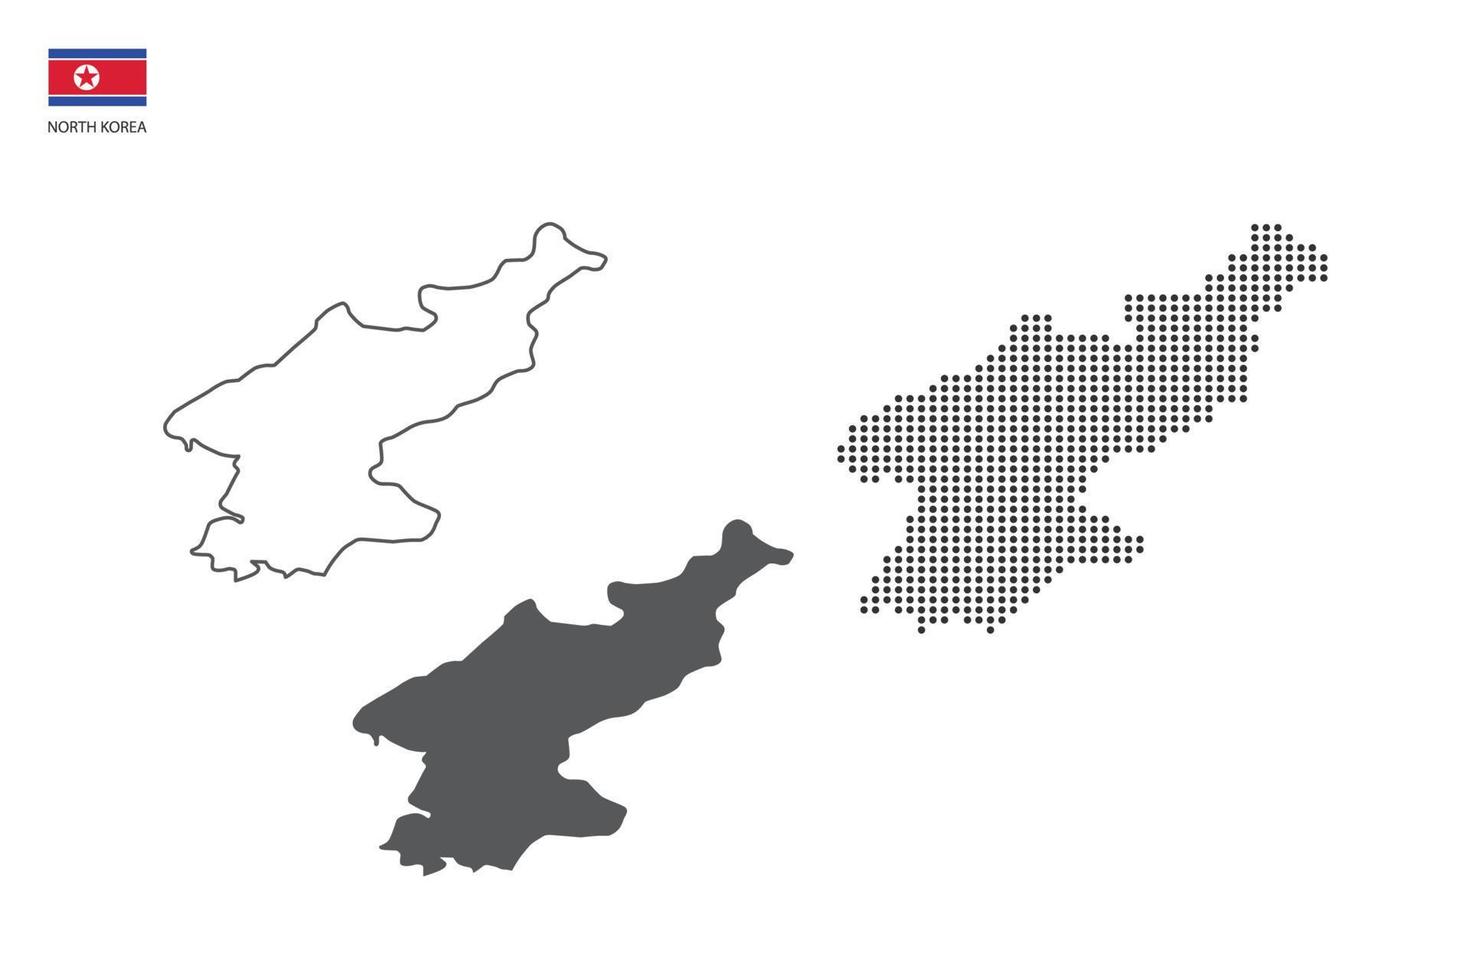 3 versions of North Korea map city vector by thin black outline simplicity style, Black dot style and Dark shadow style. All in the white background.